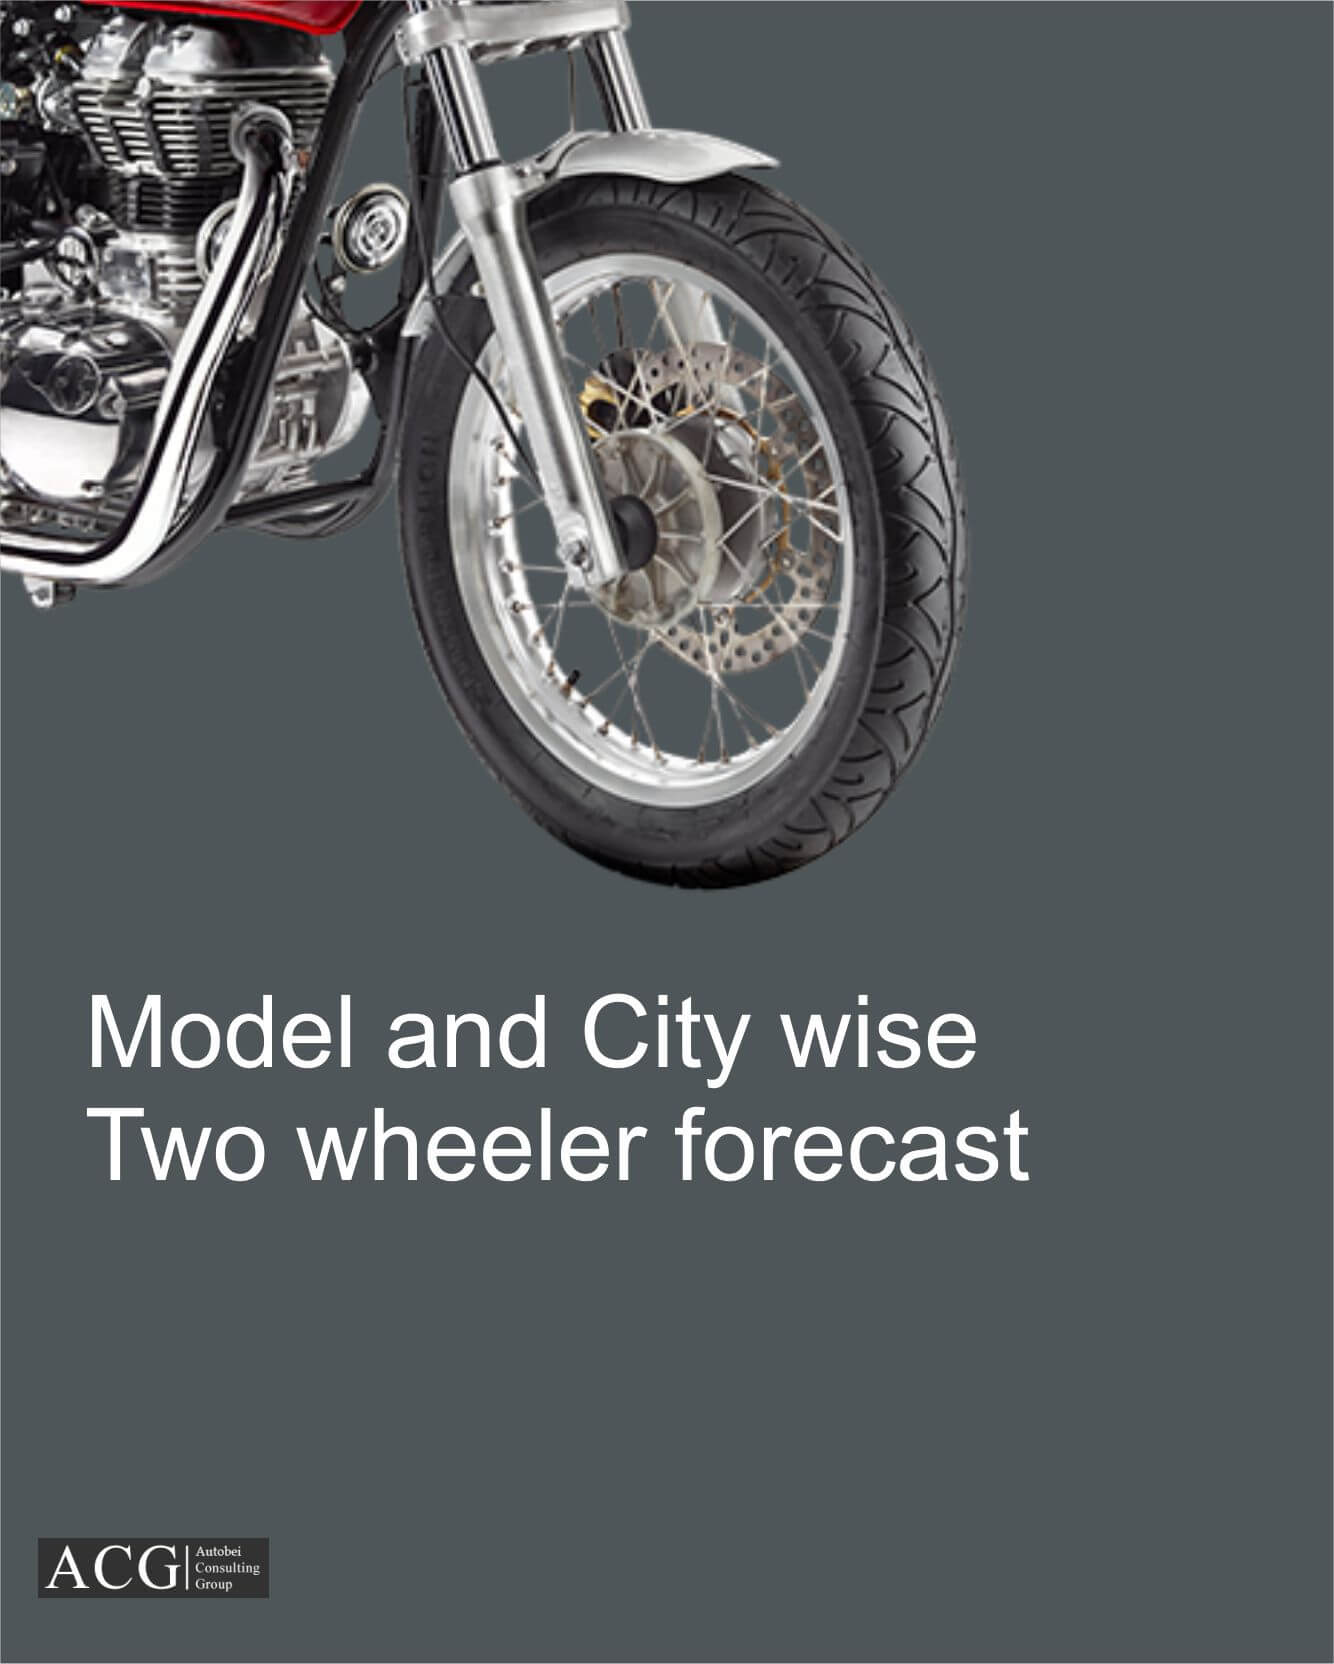 Model and City wise Two wheeler forecast